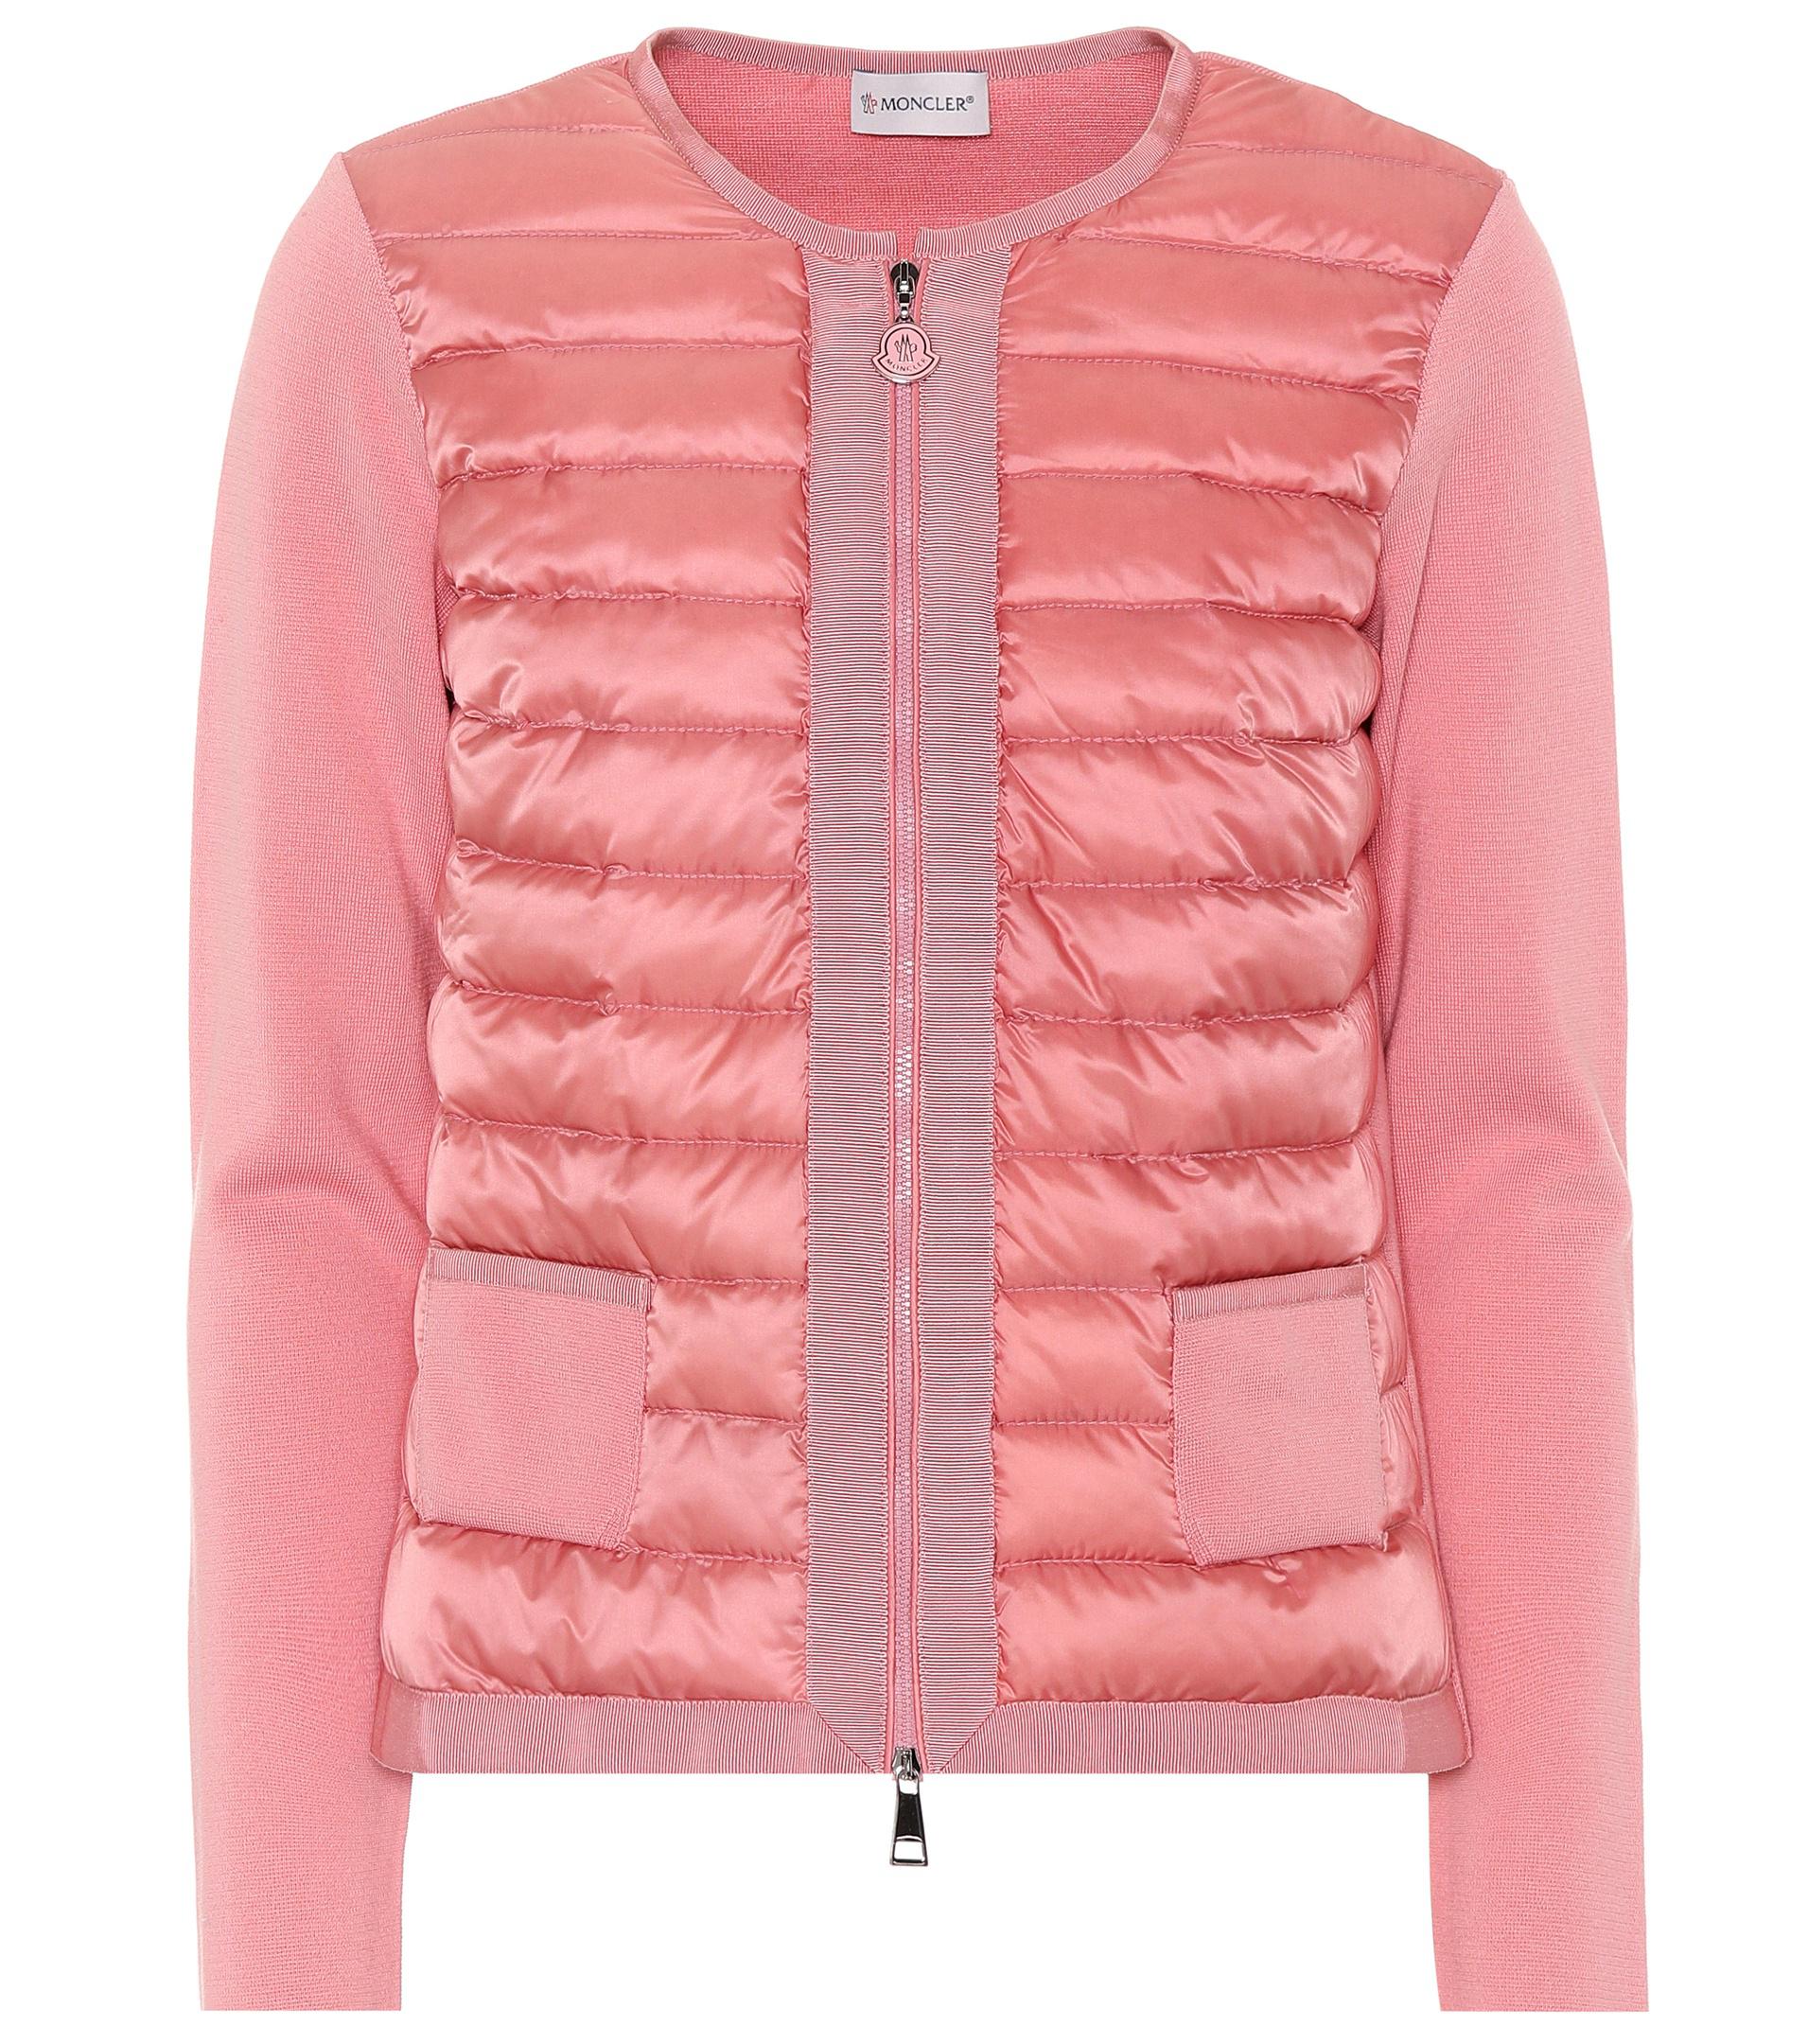 Moncler Quilted Down Cardigan in Pink - Lyst